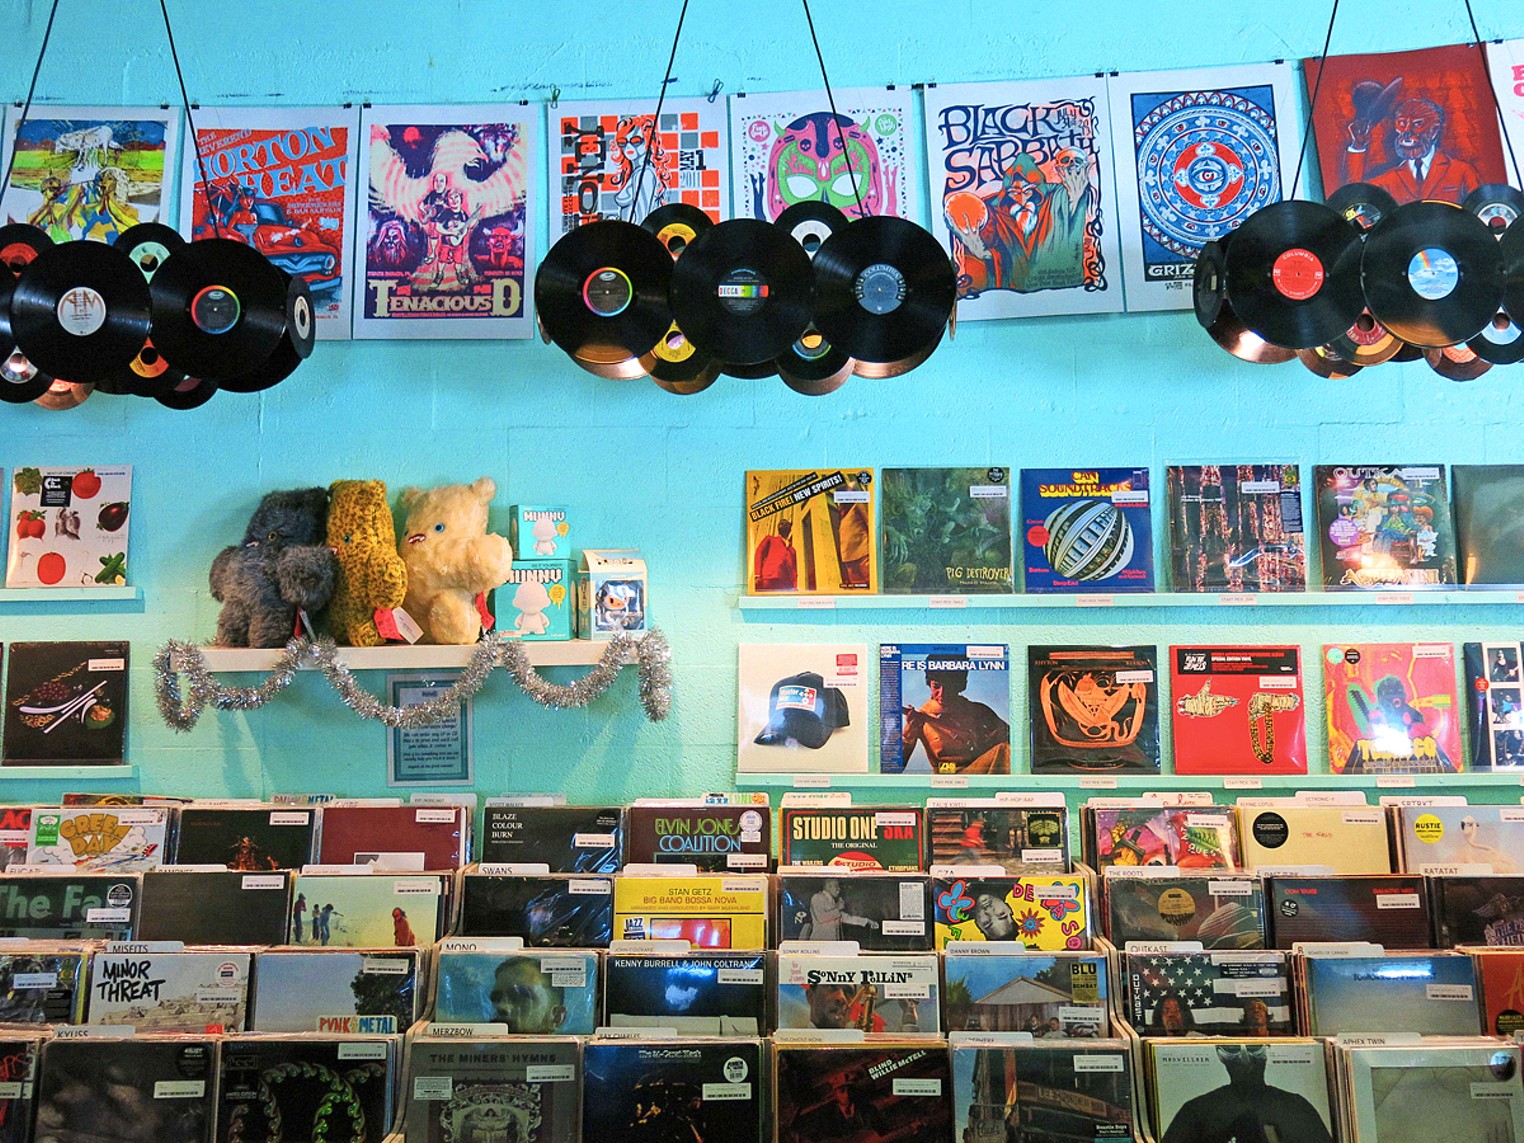 Best Record/CD Store 2008 Sweat Records Best Restaurants, Bars, Clubs, Music and Stores in Miami Miami New Times